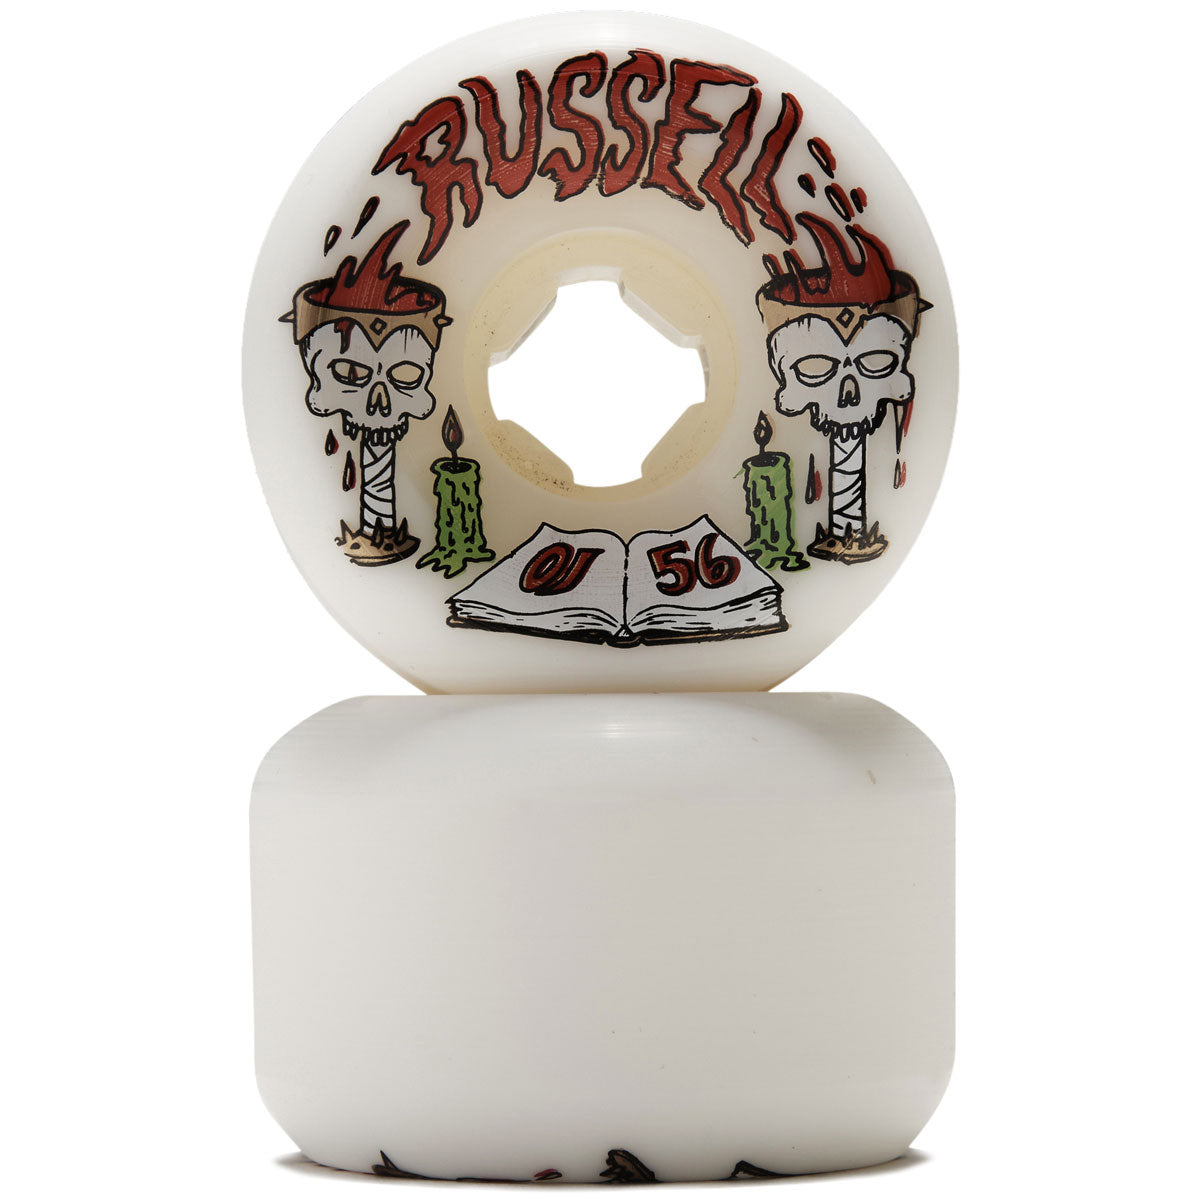 OJ Chris Russell Goblet Double Duro Prototypes 101a/95a Skateboard Wheels - White - 56mm image 2